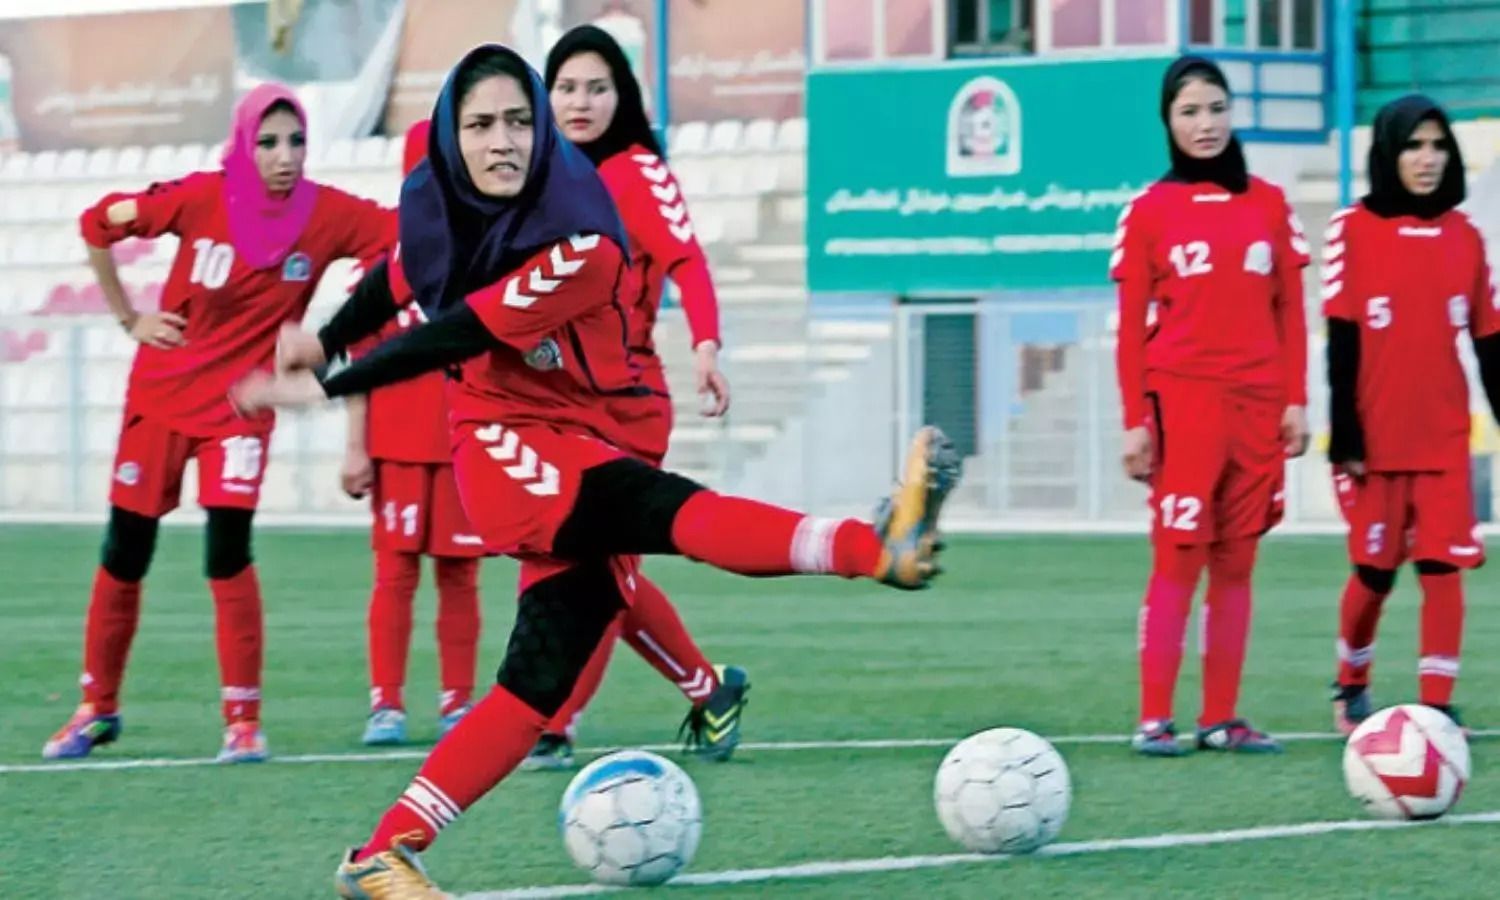 Afghanistan women's team participate in football game for the first time since exile